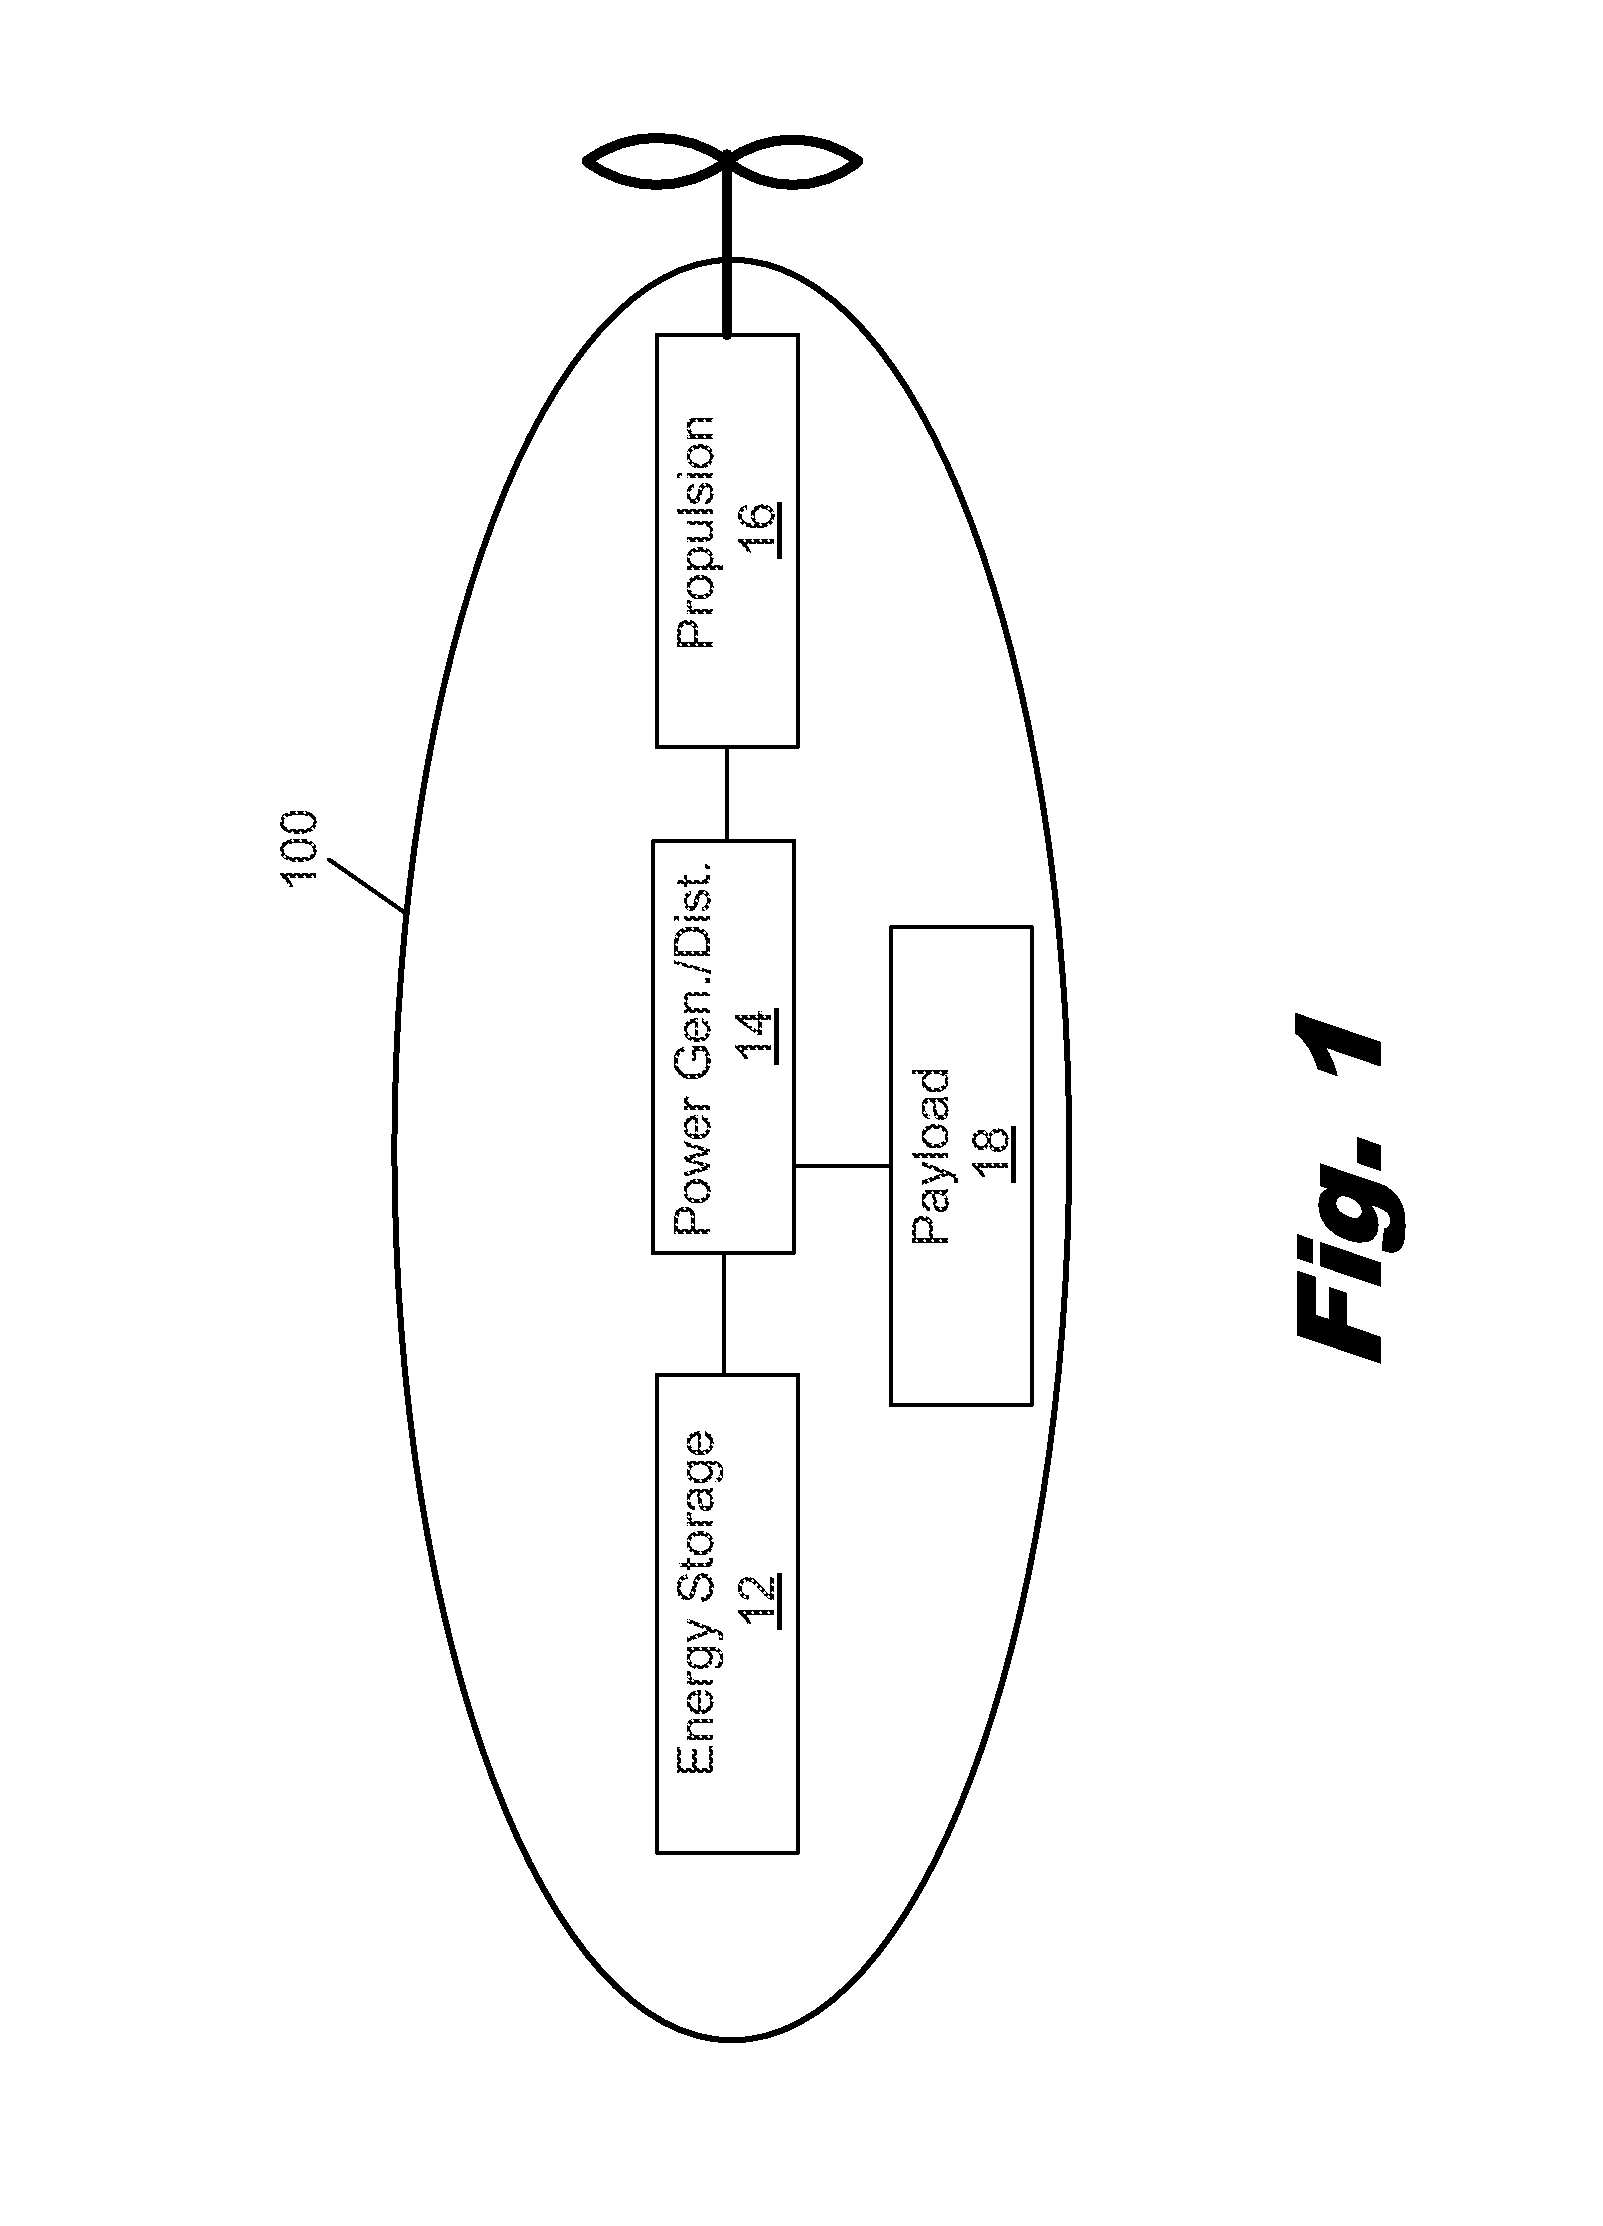 Systems and Methods for Long Endurance Airship Operations